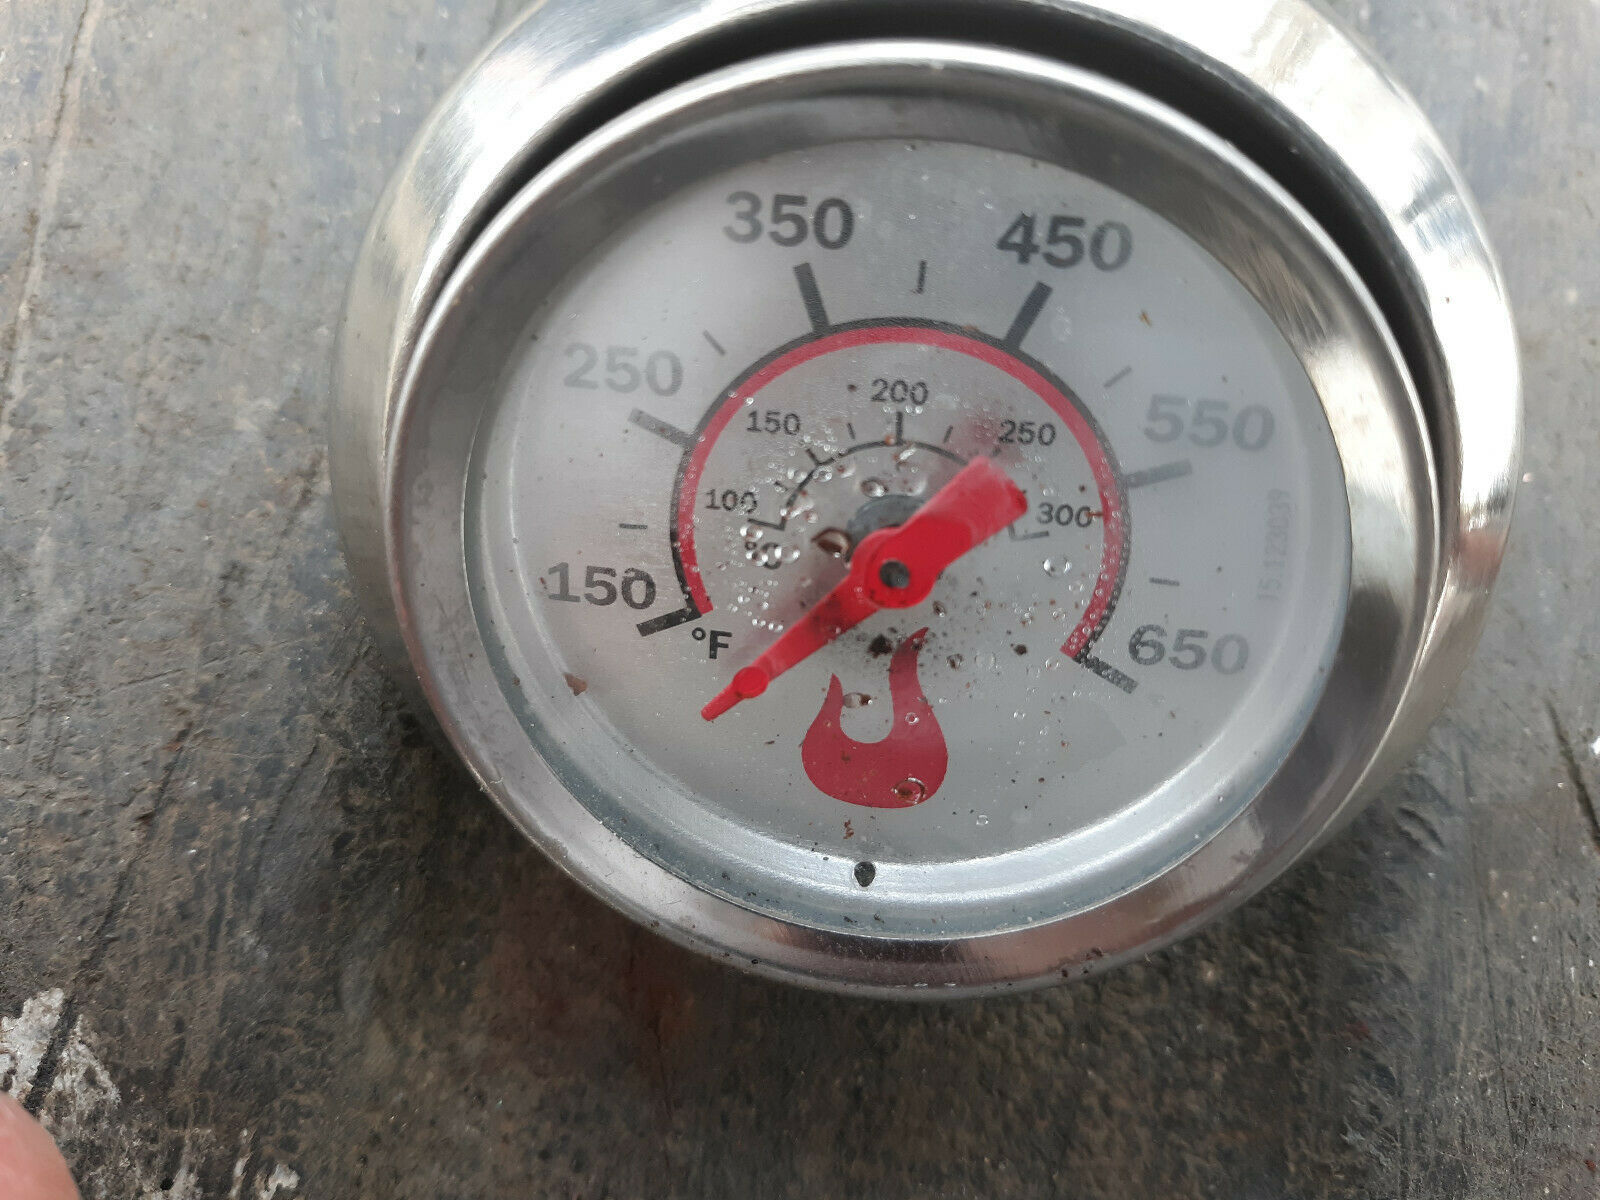 21HH30 CHARBROIL THERMOMETER, TESTS GOOD, 1-7/8" BEZEL, 2-3/8" TRIM, GOOD COND - $4.91